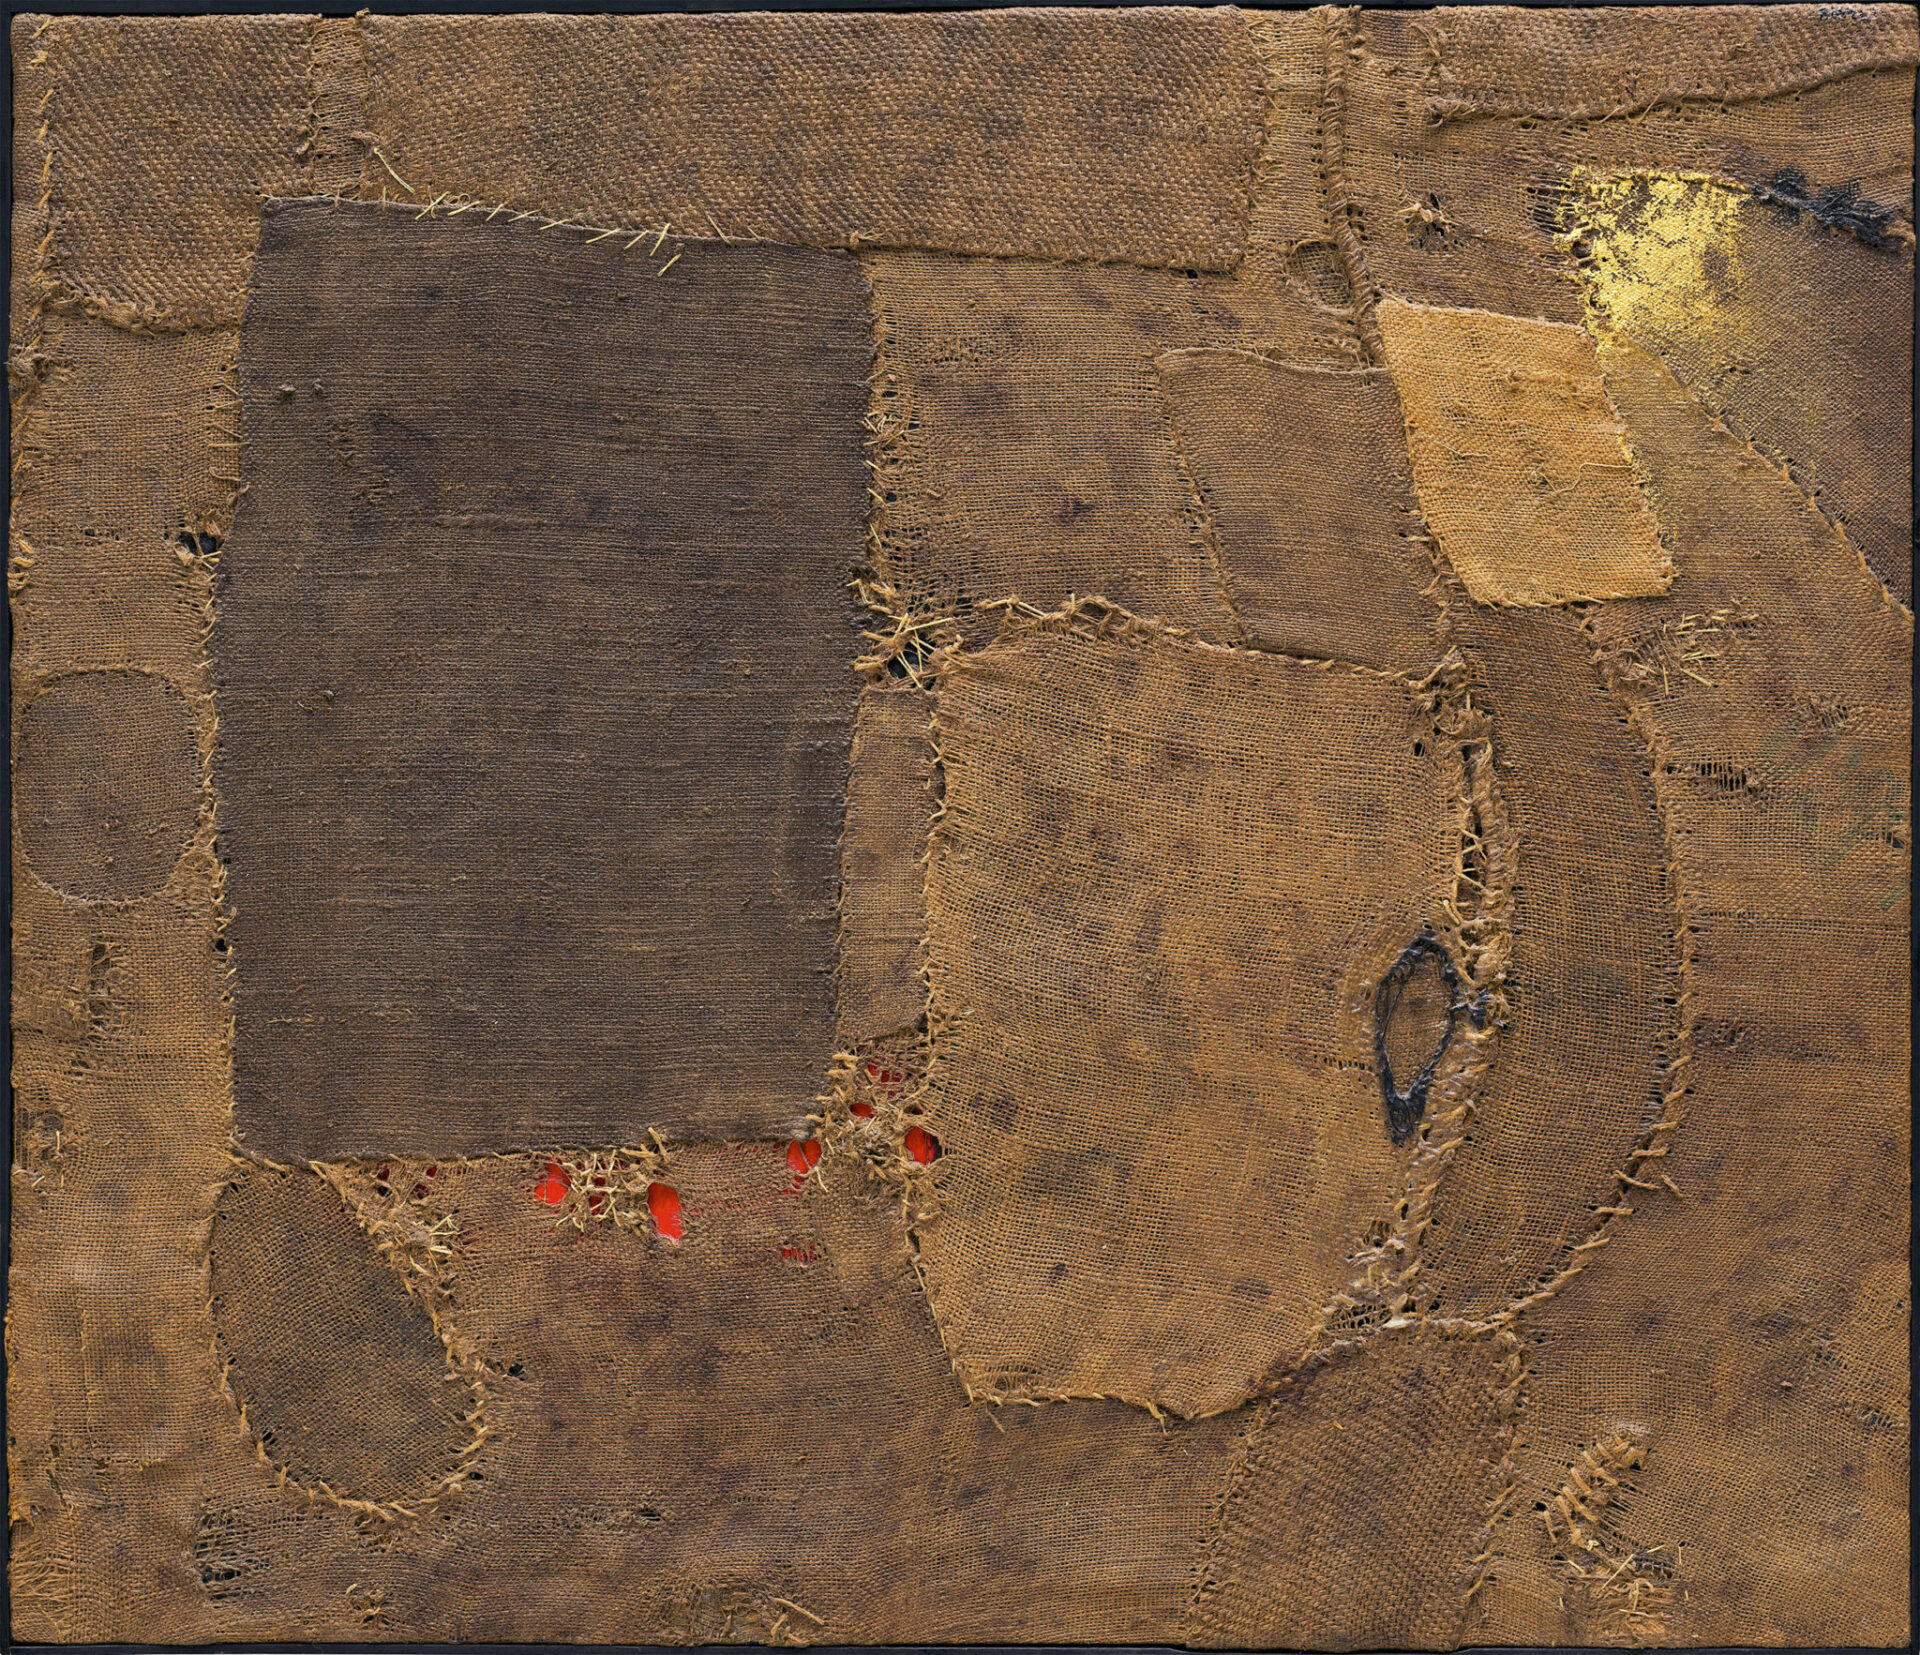 Composizione (Composition), 1953. Burlap, thread, synthetic polymer paint, gold leaf, and PVA on black fabric, 86 x 100.4 cm. Solomon R. Guggenheim Museum, New York 53.1364. Photo: Kristopher McKay © Solomon R. Guggenheim Foundation, New York